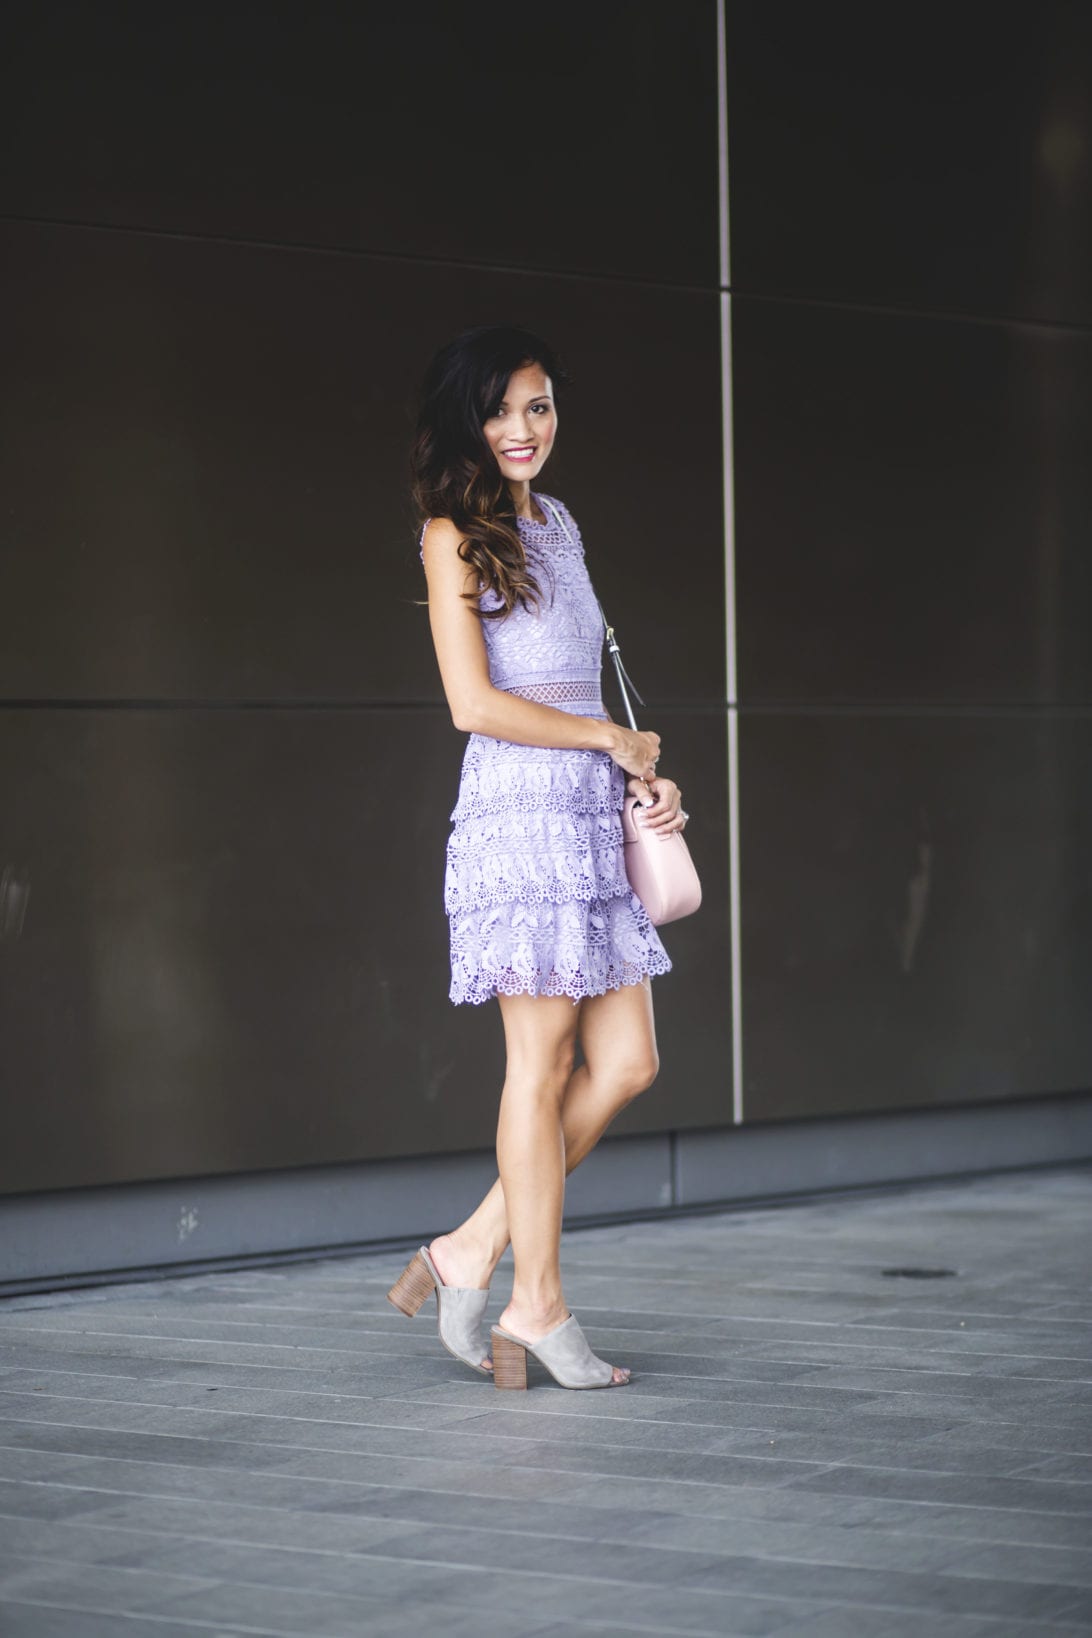 lace dress, purple lace dress Sunday best, what to wear to church, gray mules, pink bag. blazer jacket, layer for fall, pastel dresses, lace dresses 